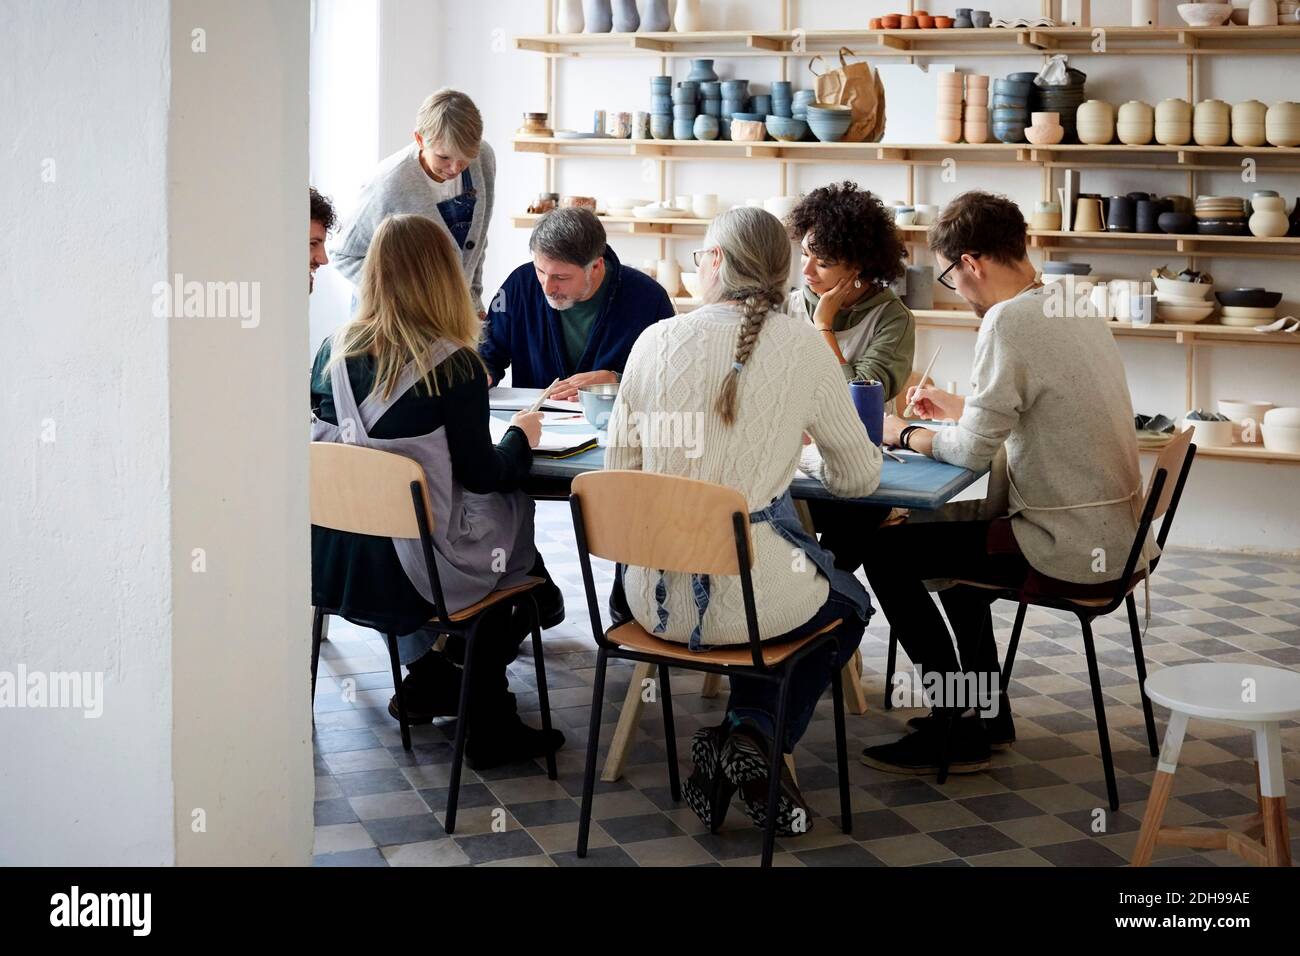 Female instructor examining drawing of students at table during art class Stock Photo